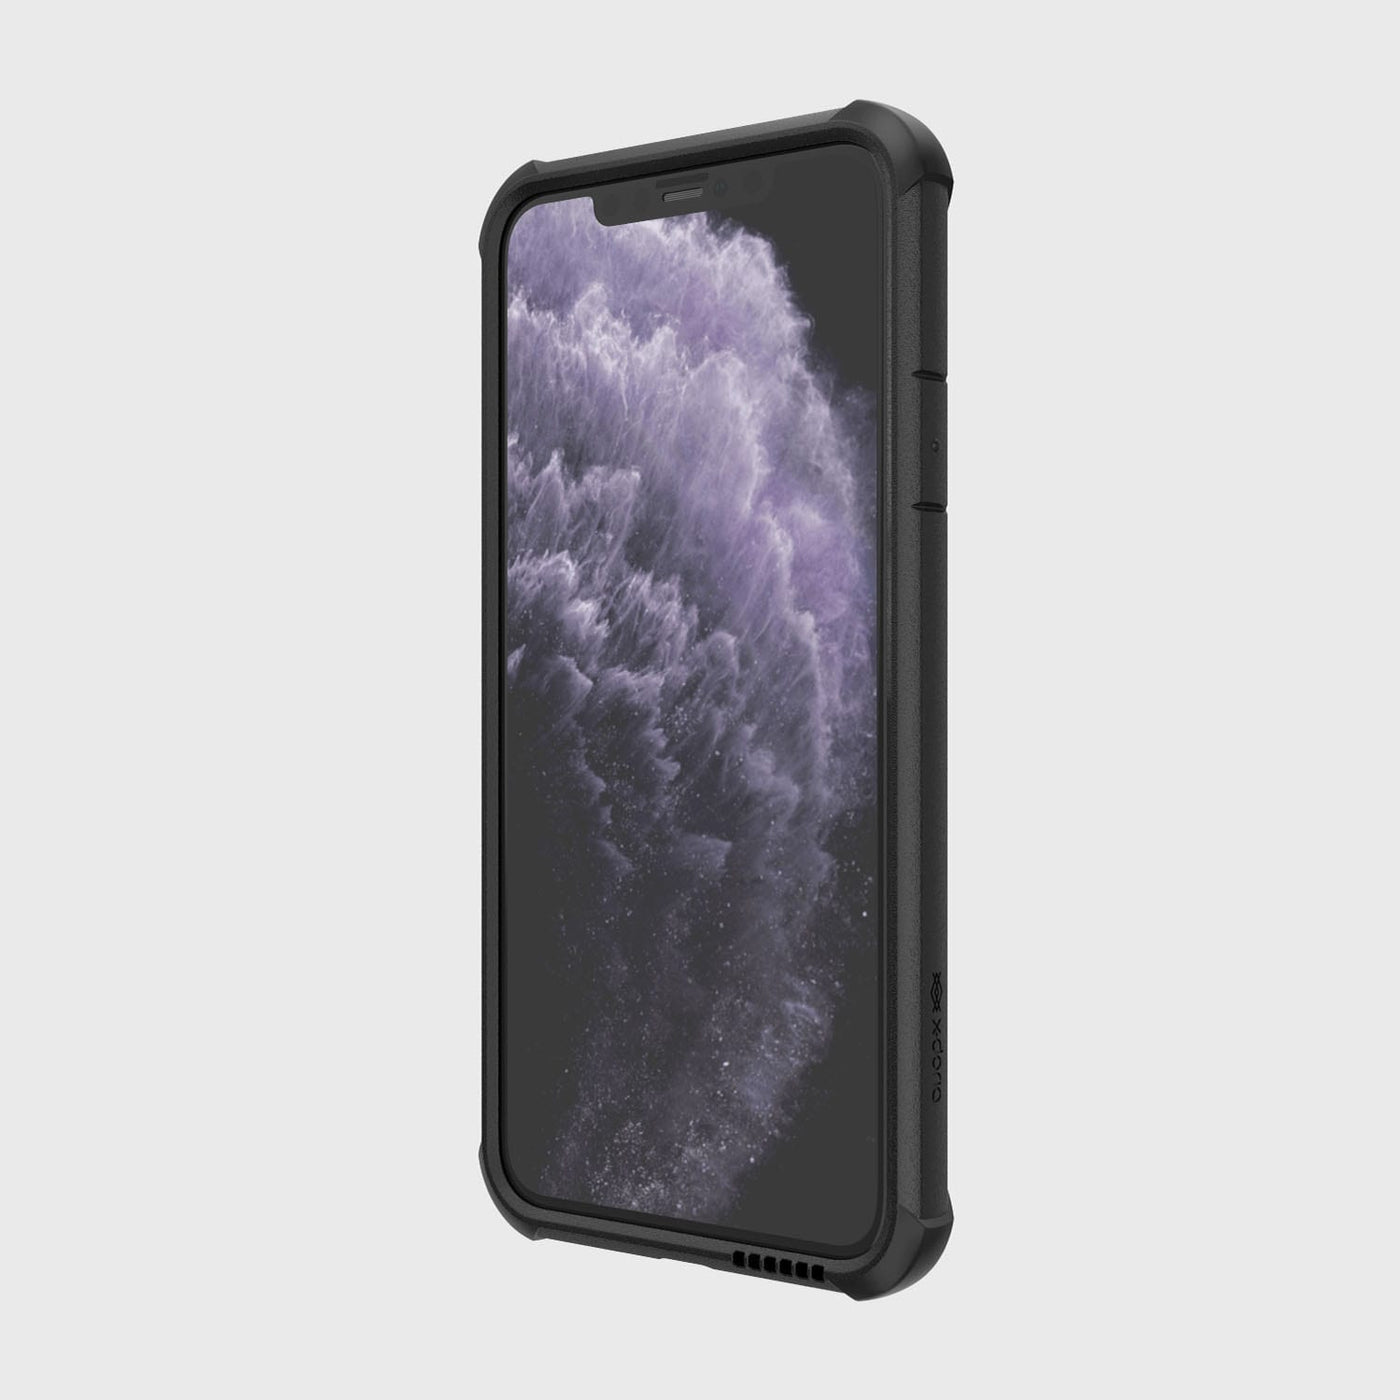 iPhone 11 Pro Max Case - TACTICAL